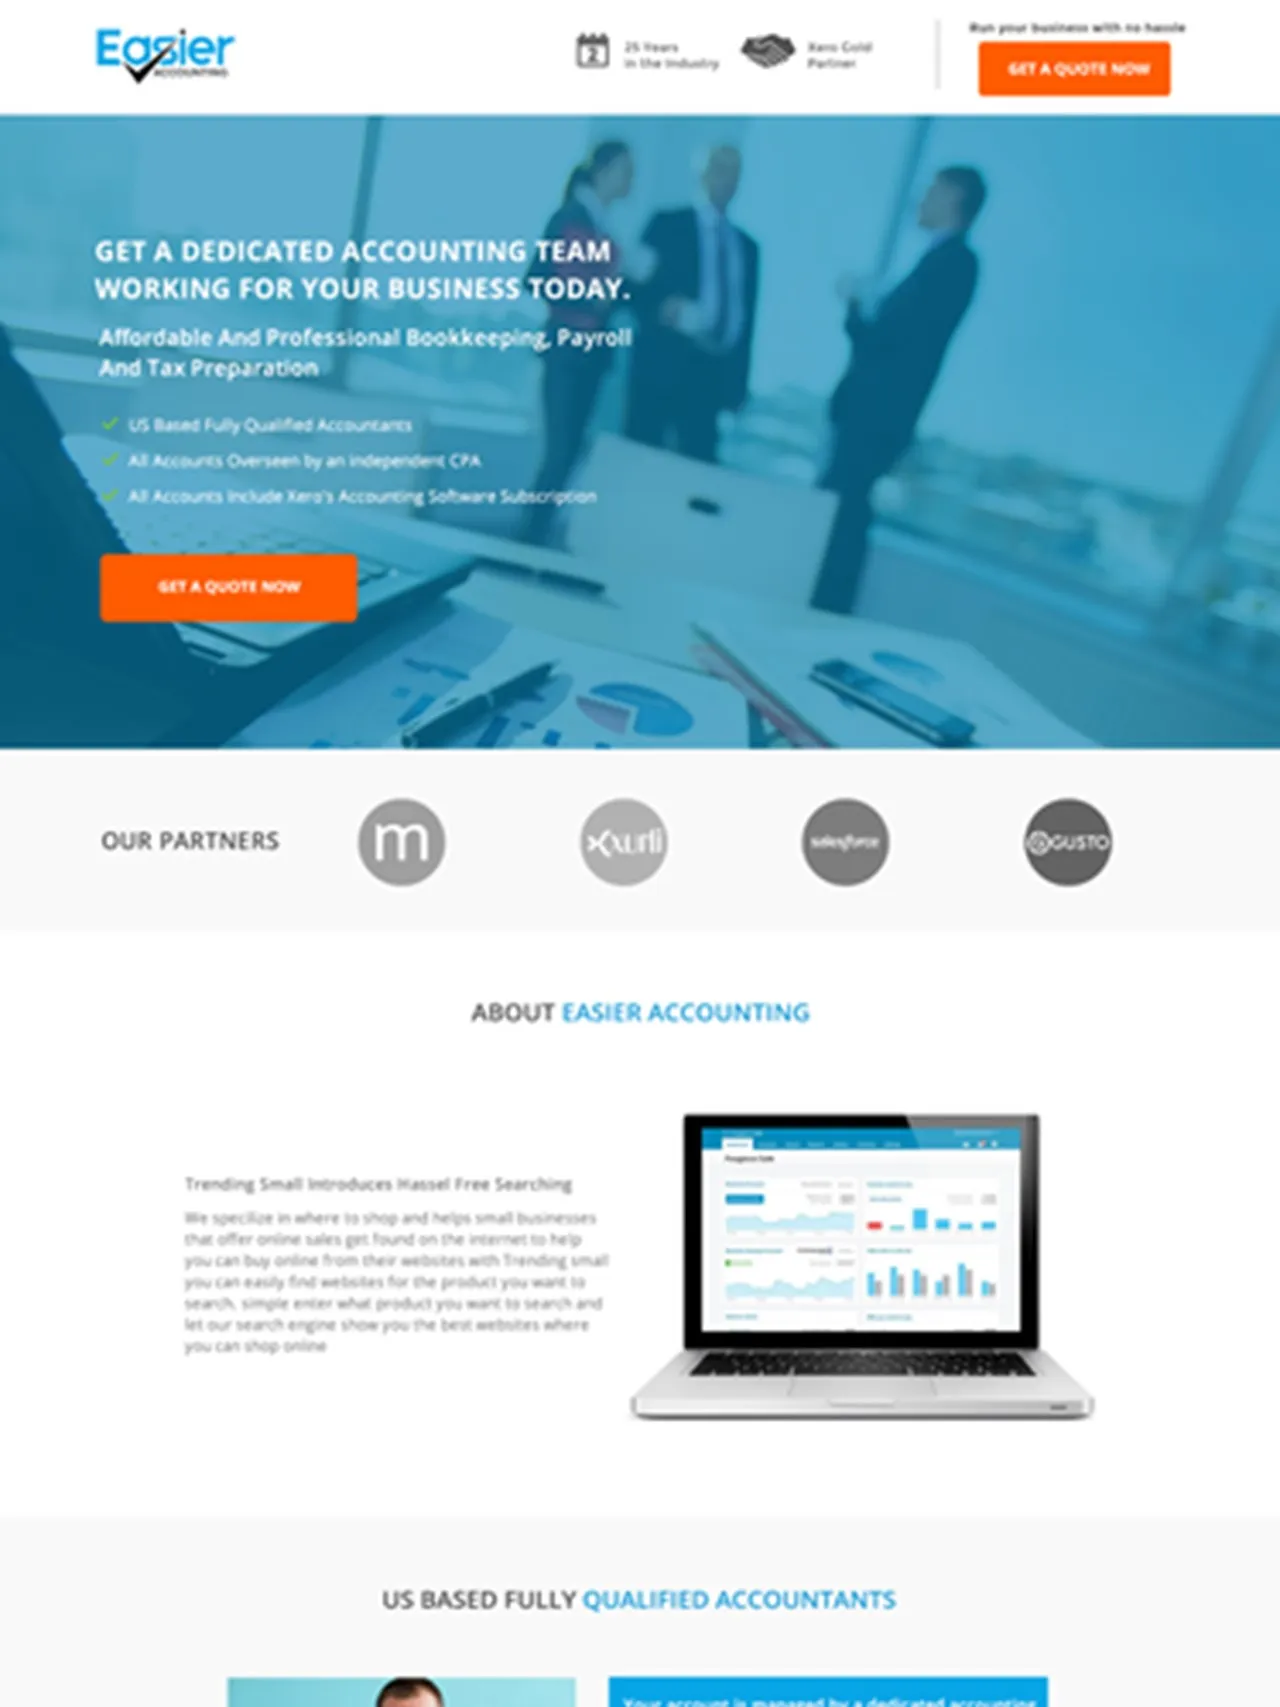 Accounting landing page Easier Accounting 